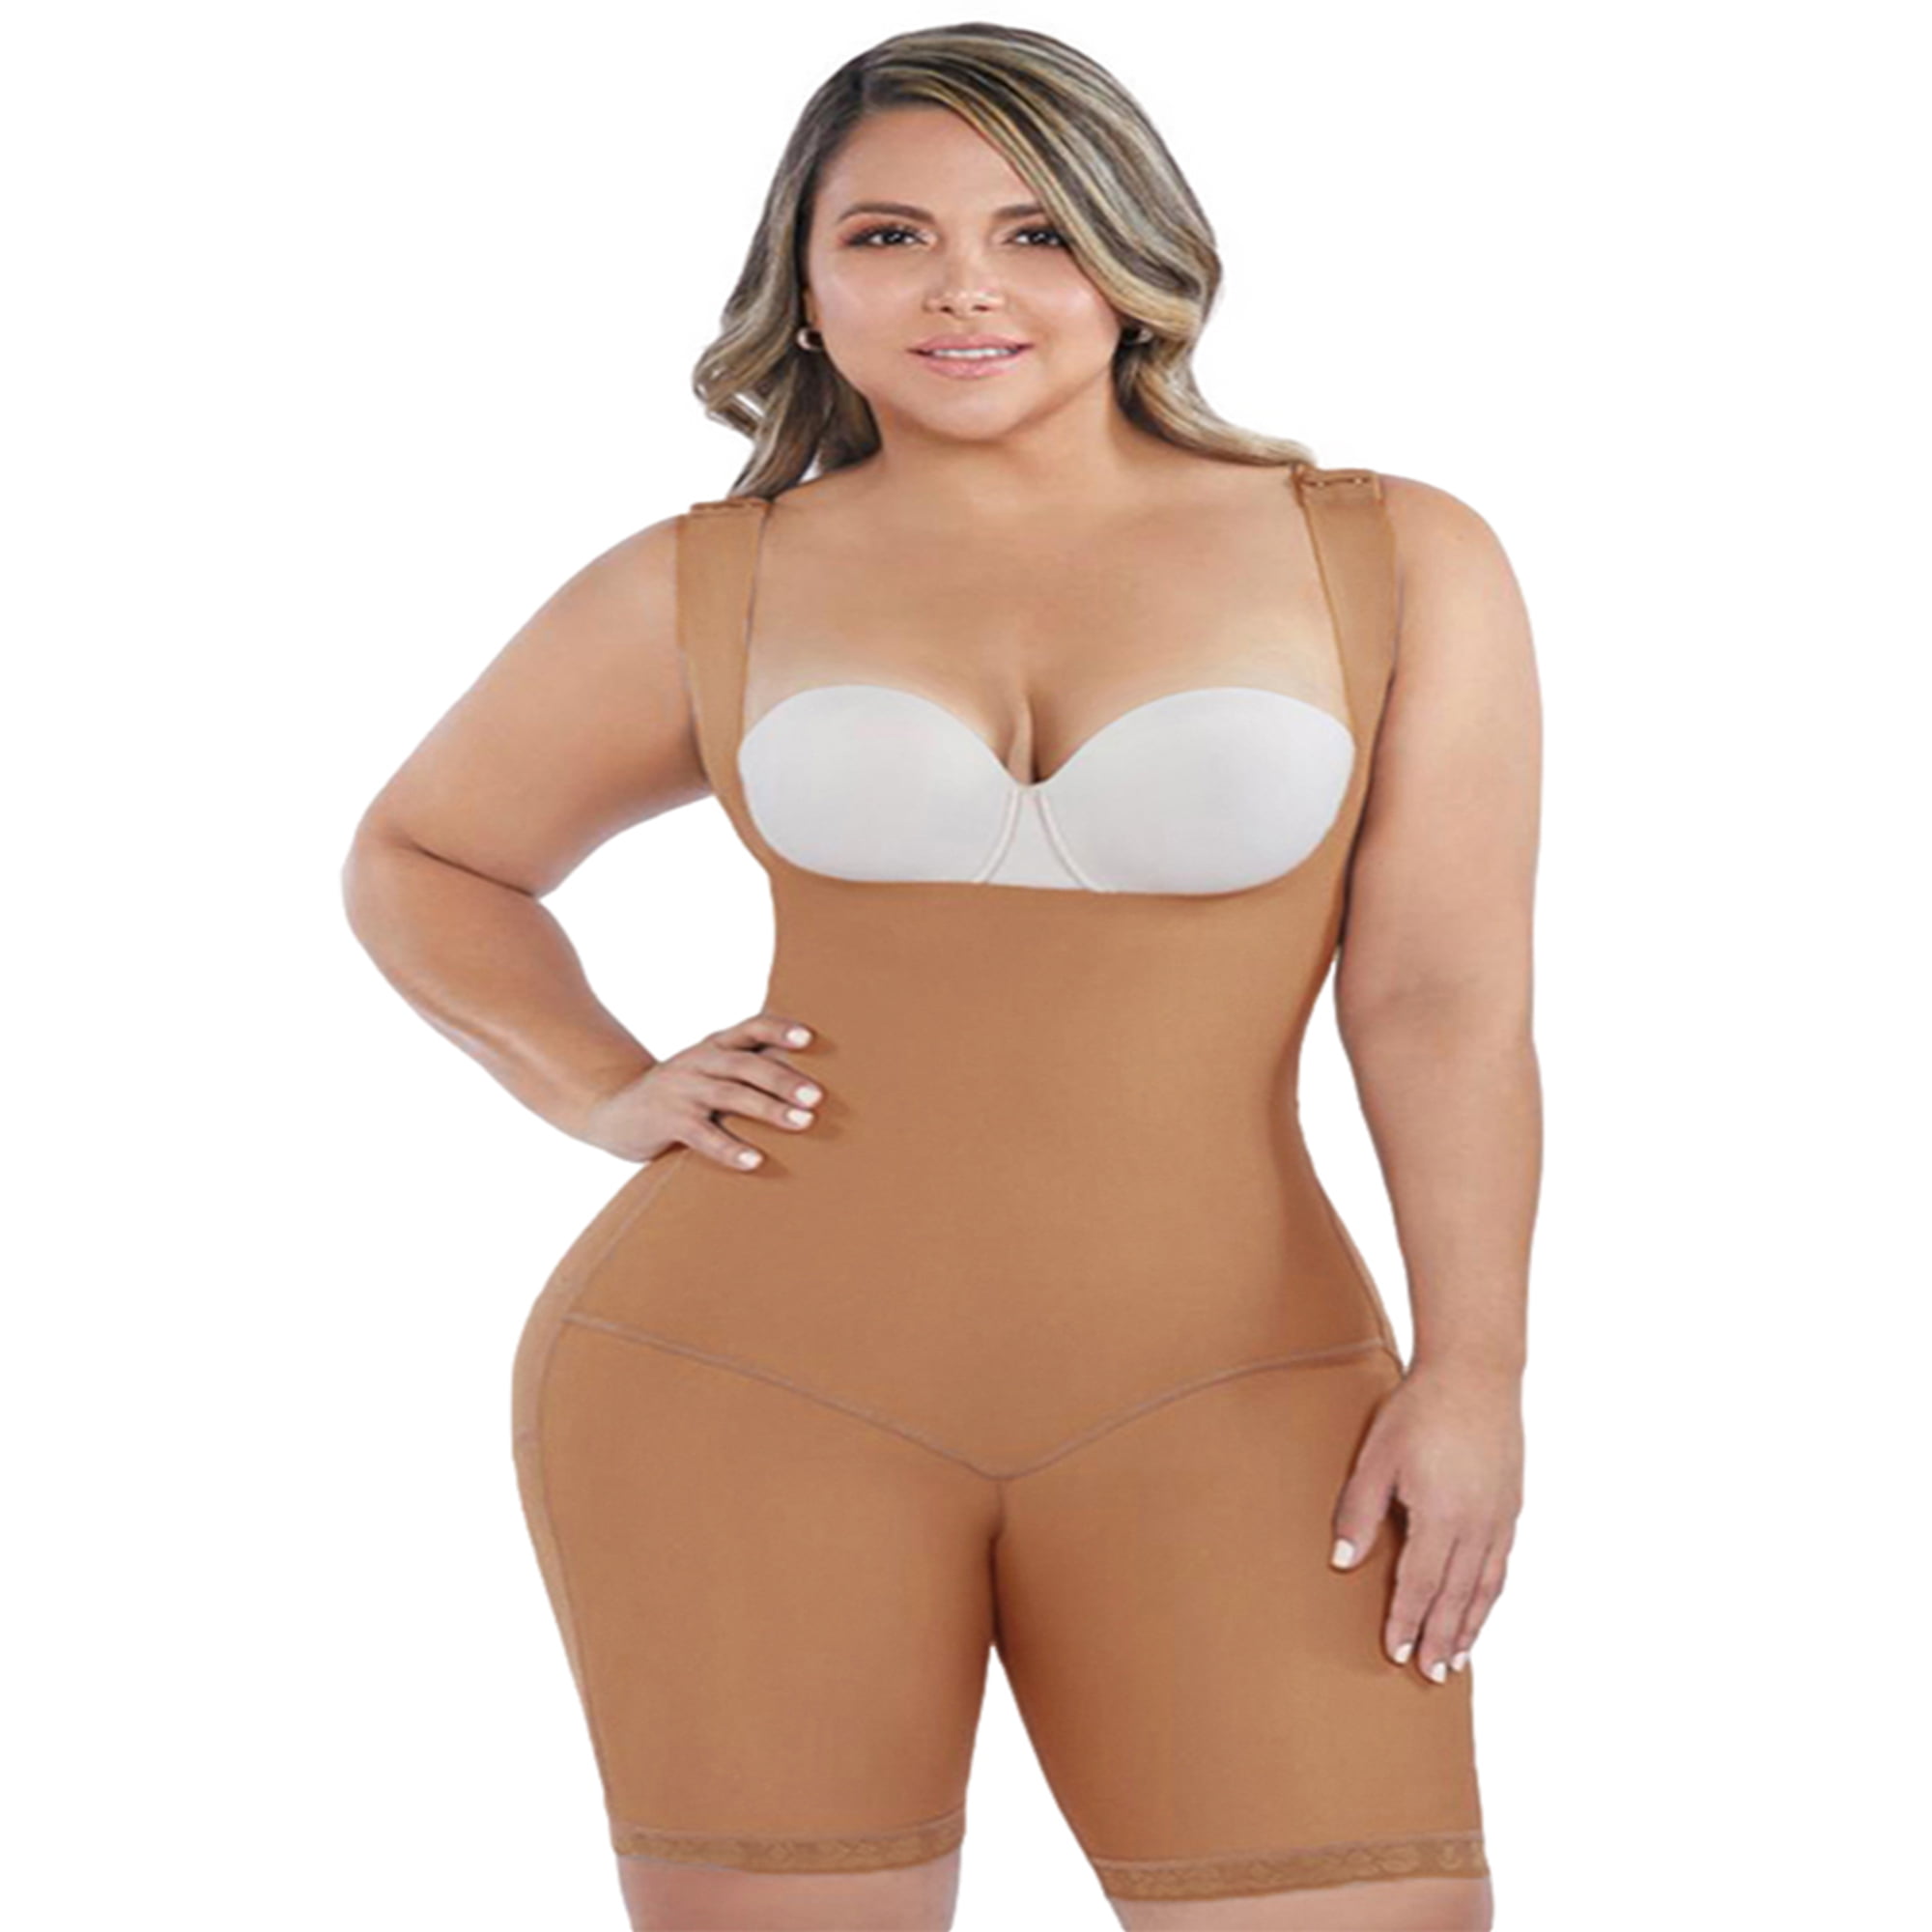 Women's Plus Size Cortland Intimates Firm Control Shaping